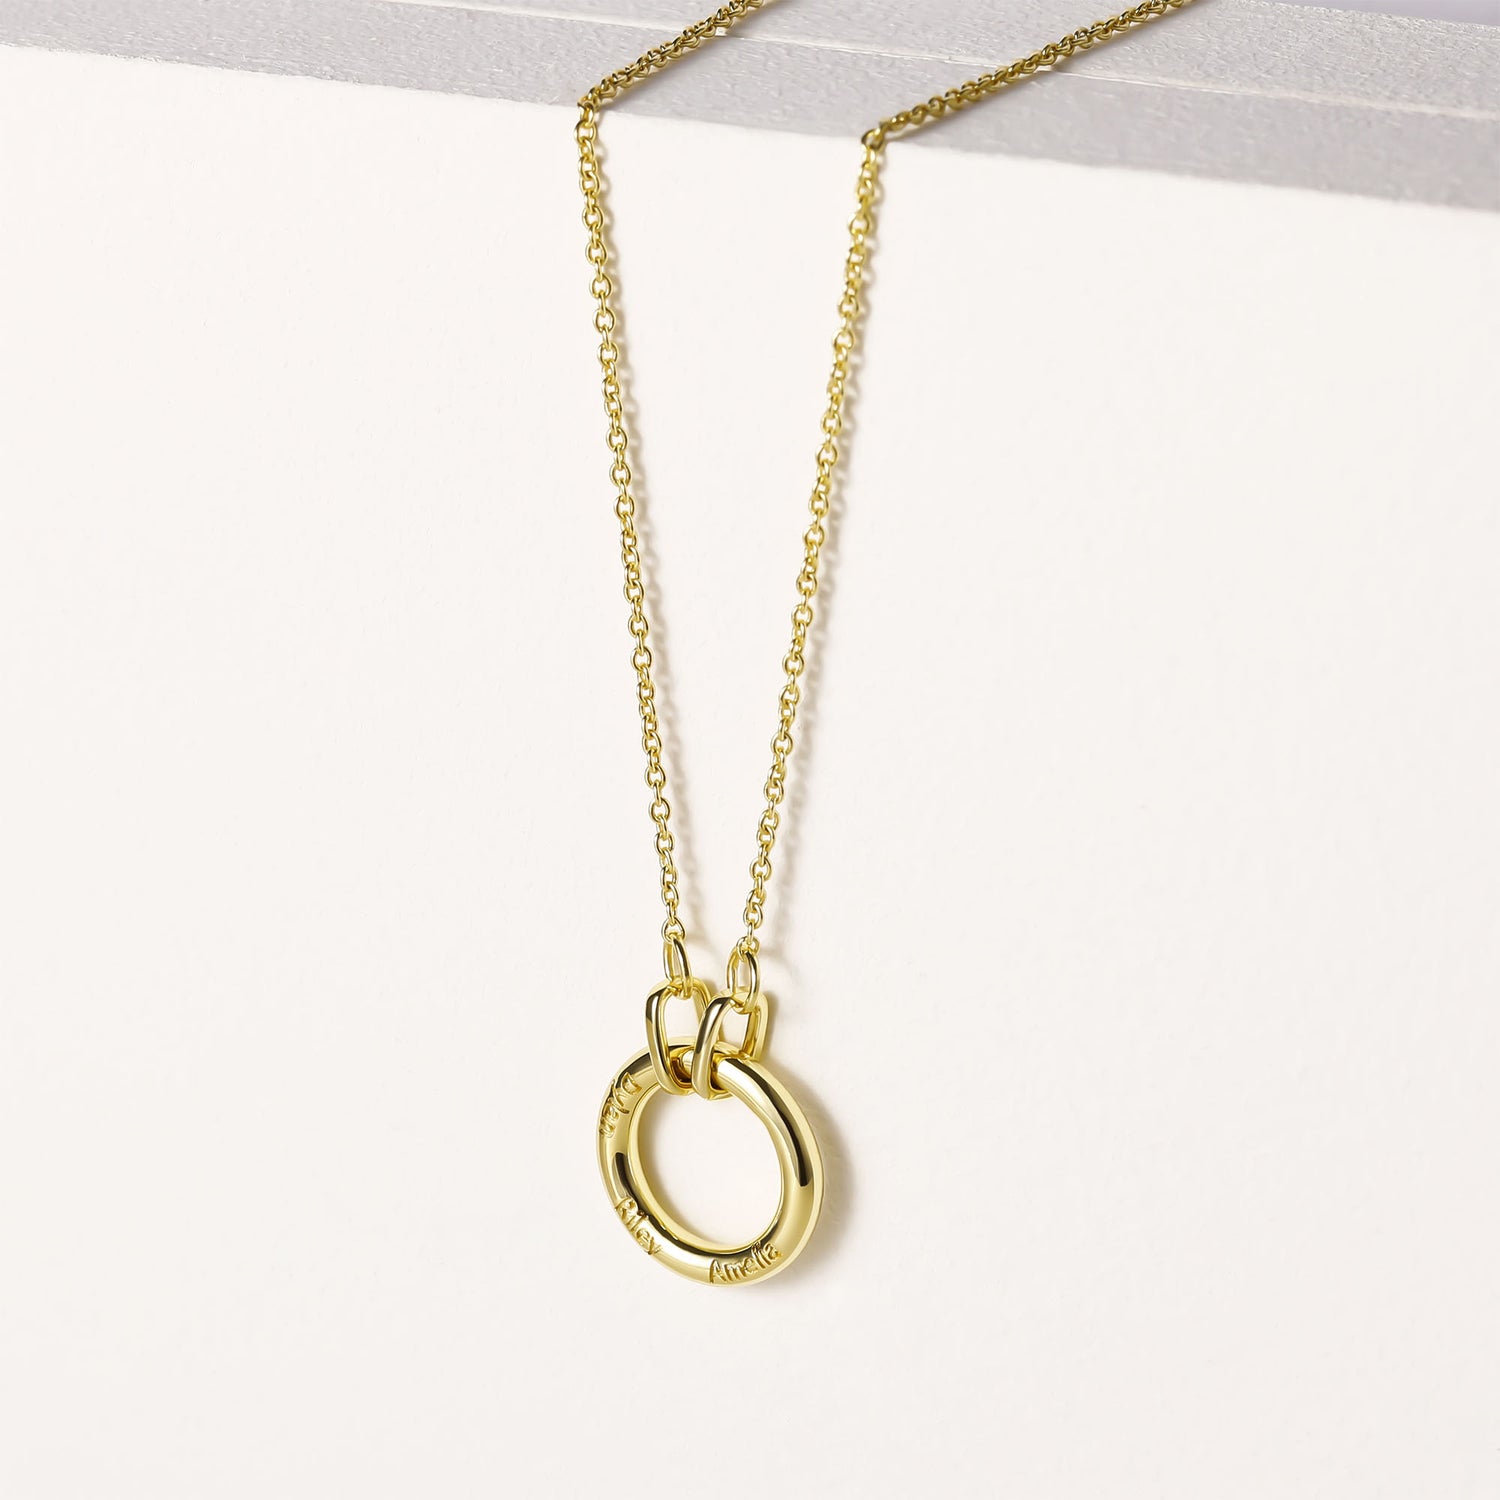 yellow gold necklace, pendant necklace, name circle necklace